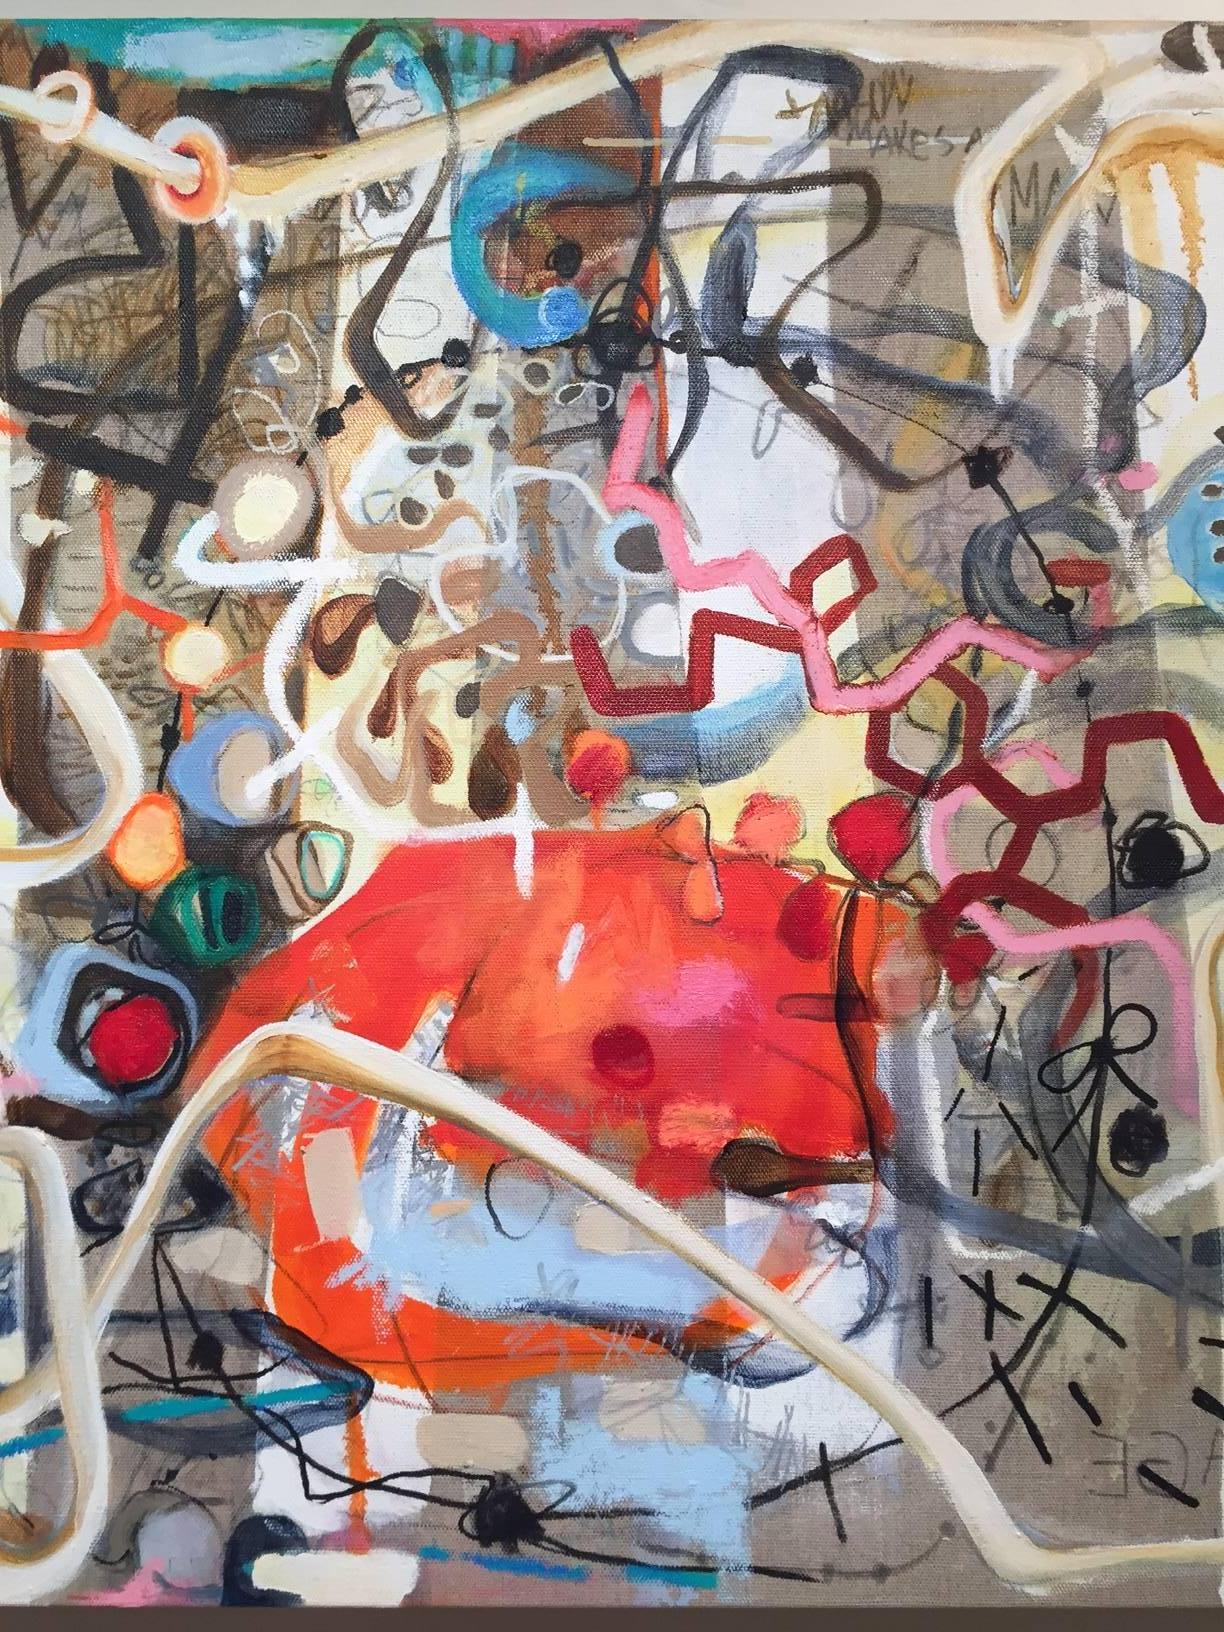 Janet Lage’s energetic abstract pieces are loaded with writing (graffiti), color, form and expressionistic brushstrokes. 
For Lage, the painting process is an alliance of language and image. The narrative is based on the changing dynamics of love